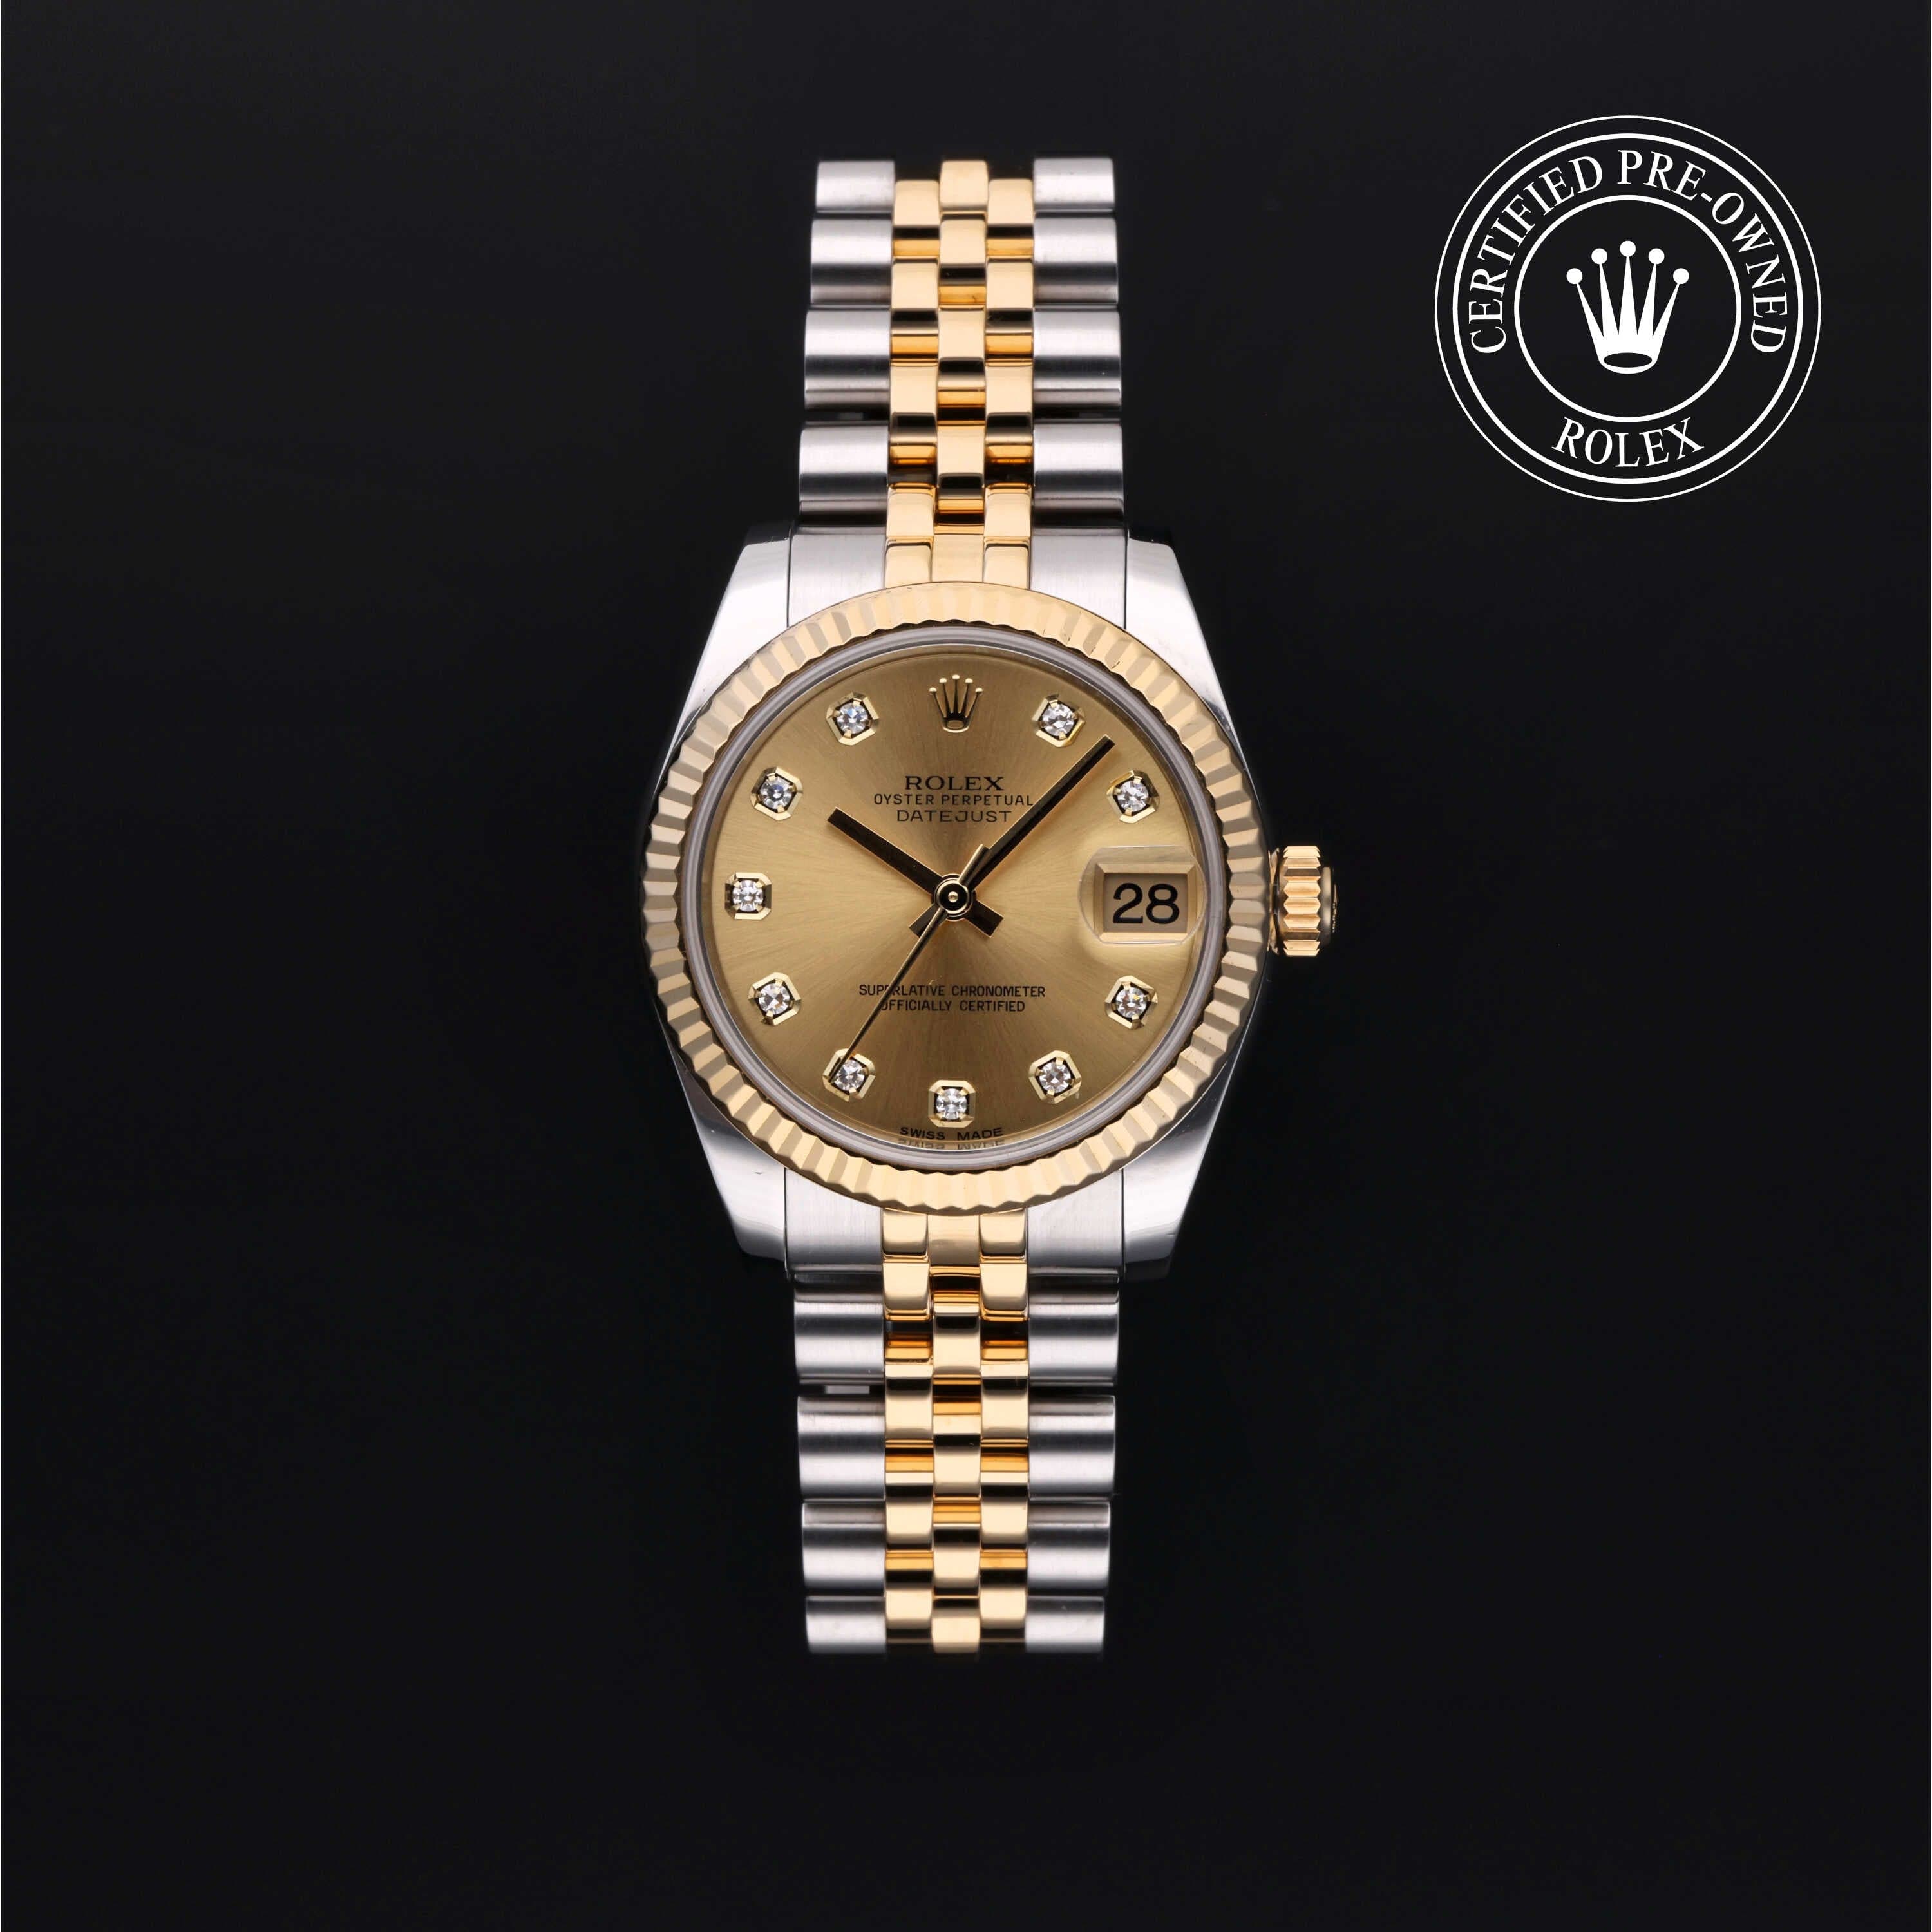 Rolex Certified Pre-Owned Datejust in 31 mm, Stainless Steel and yellow gold watch